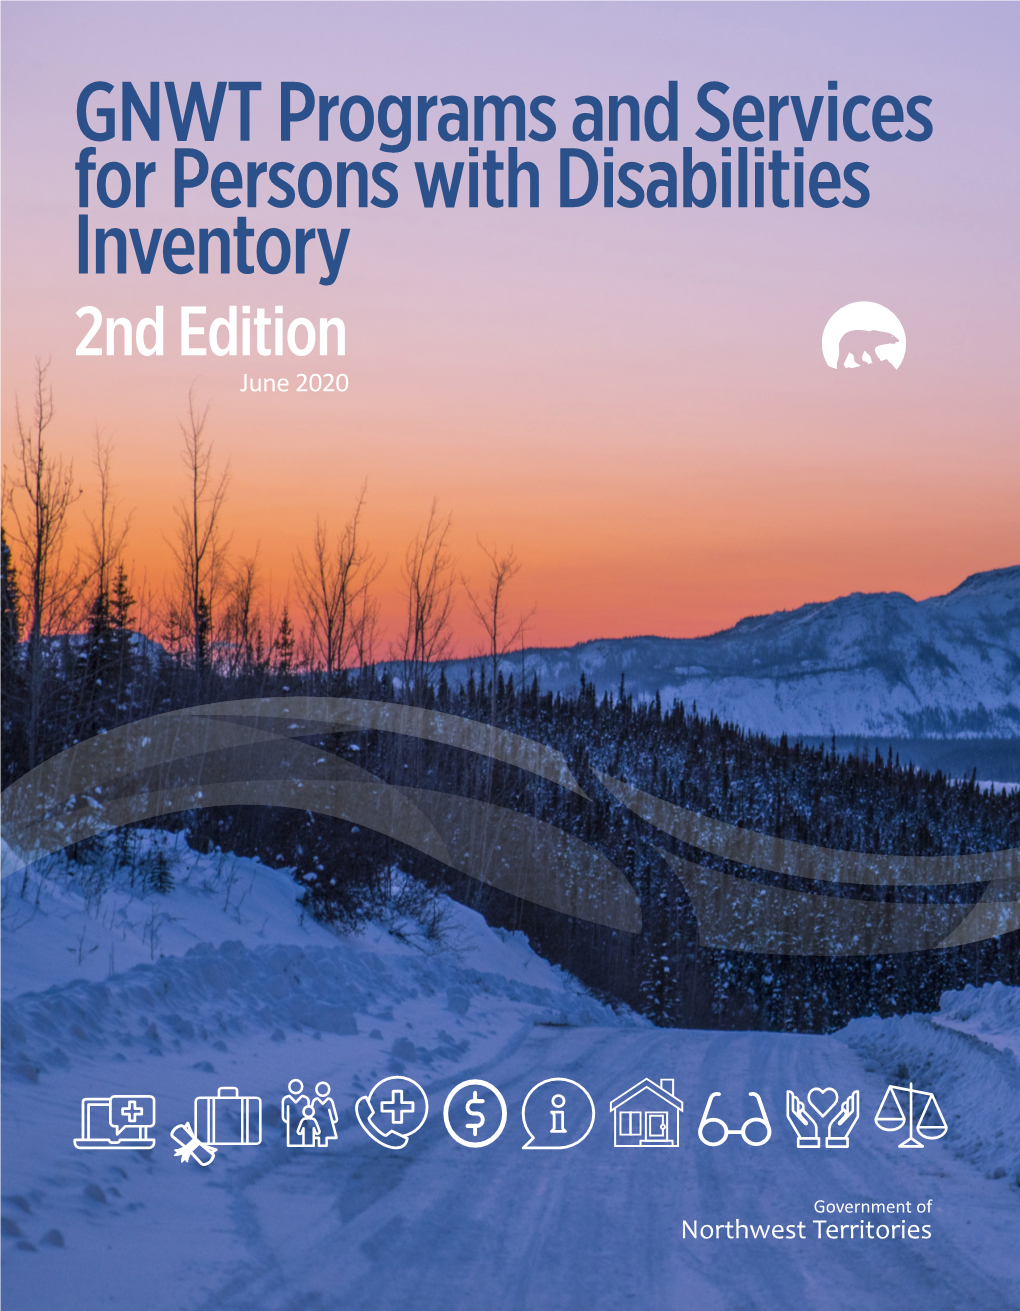 GNWT Programs and Services for Persons with Disabilities Inventory